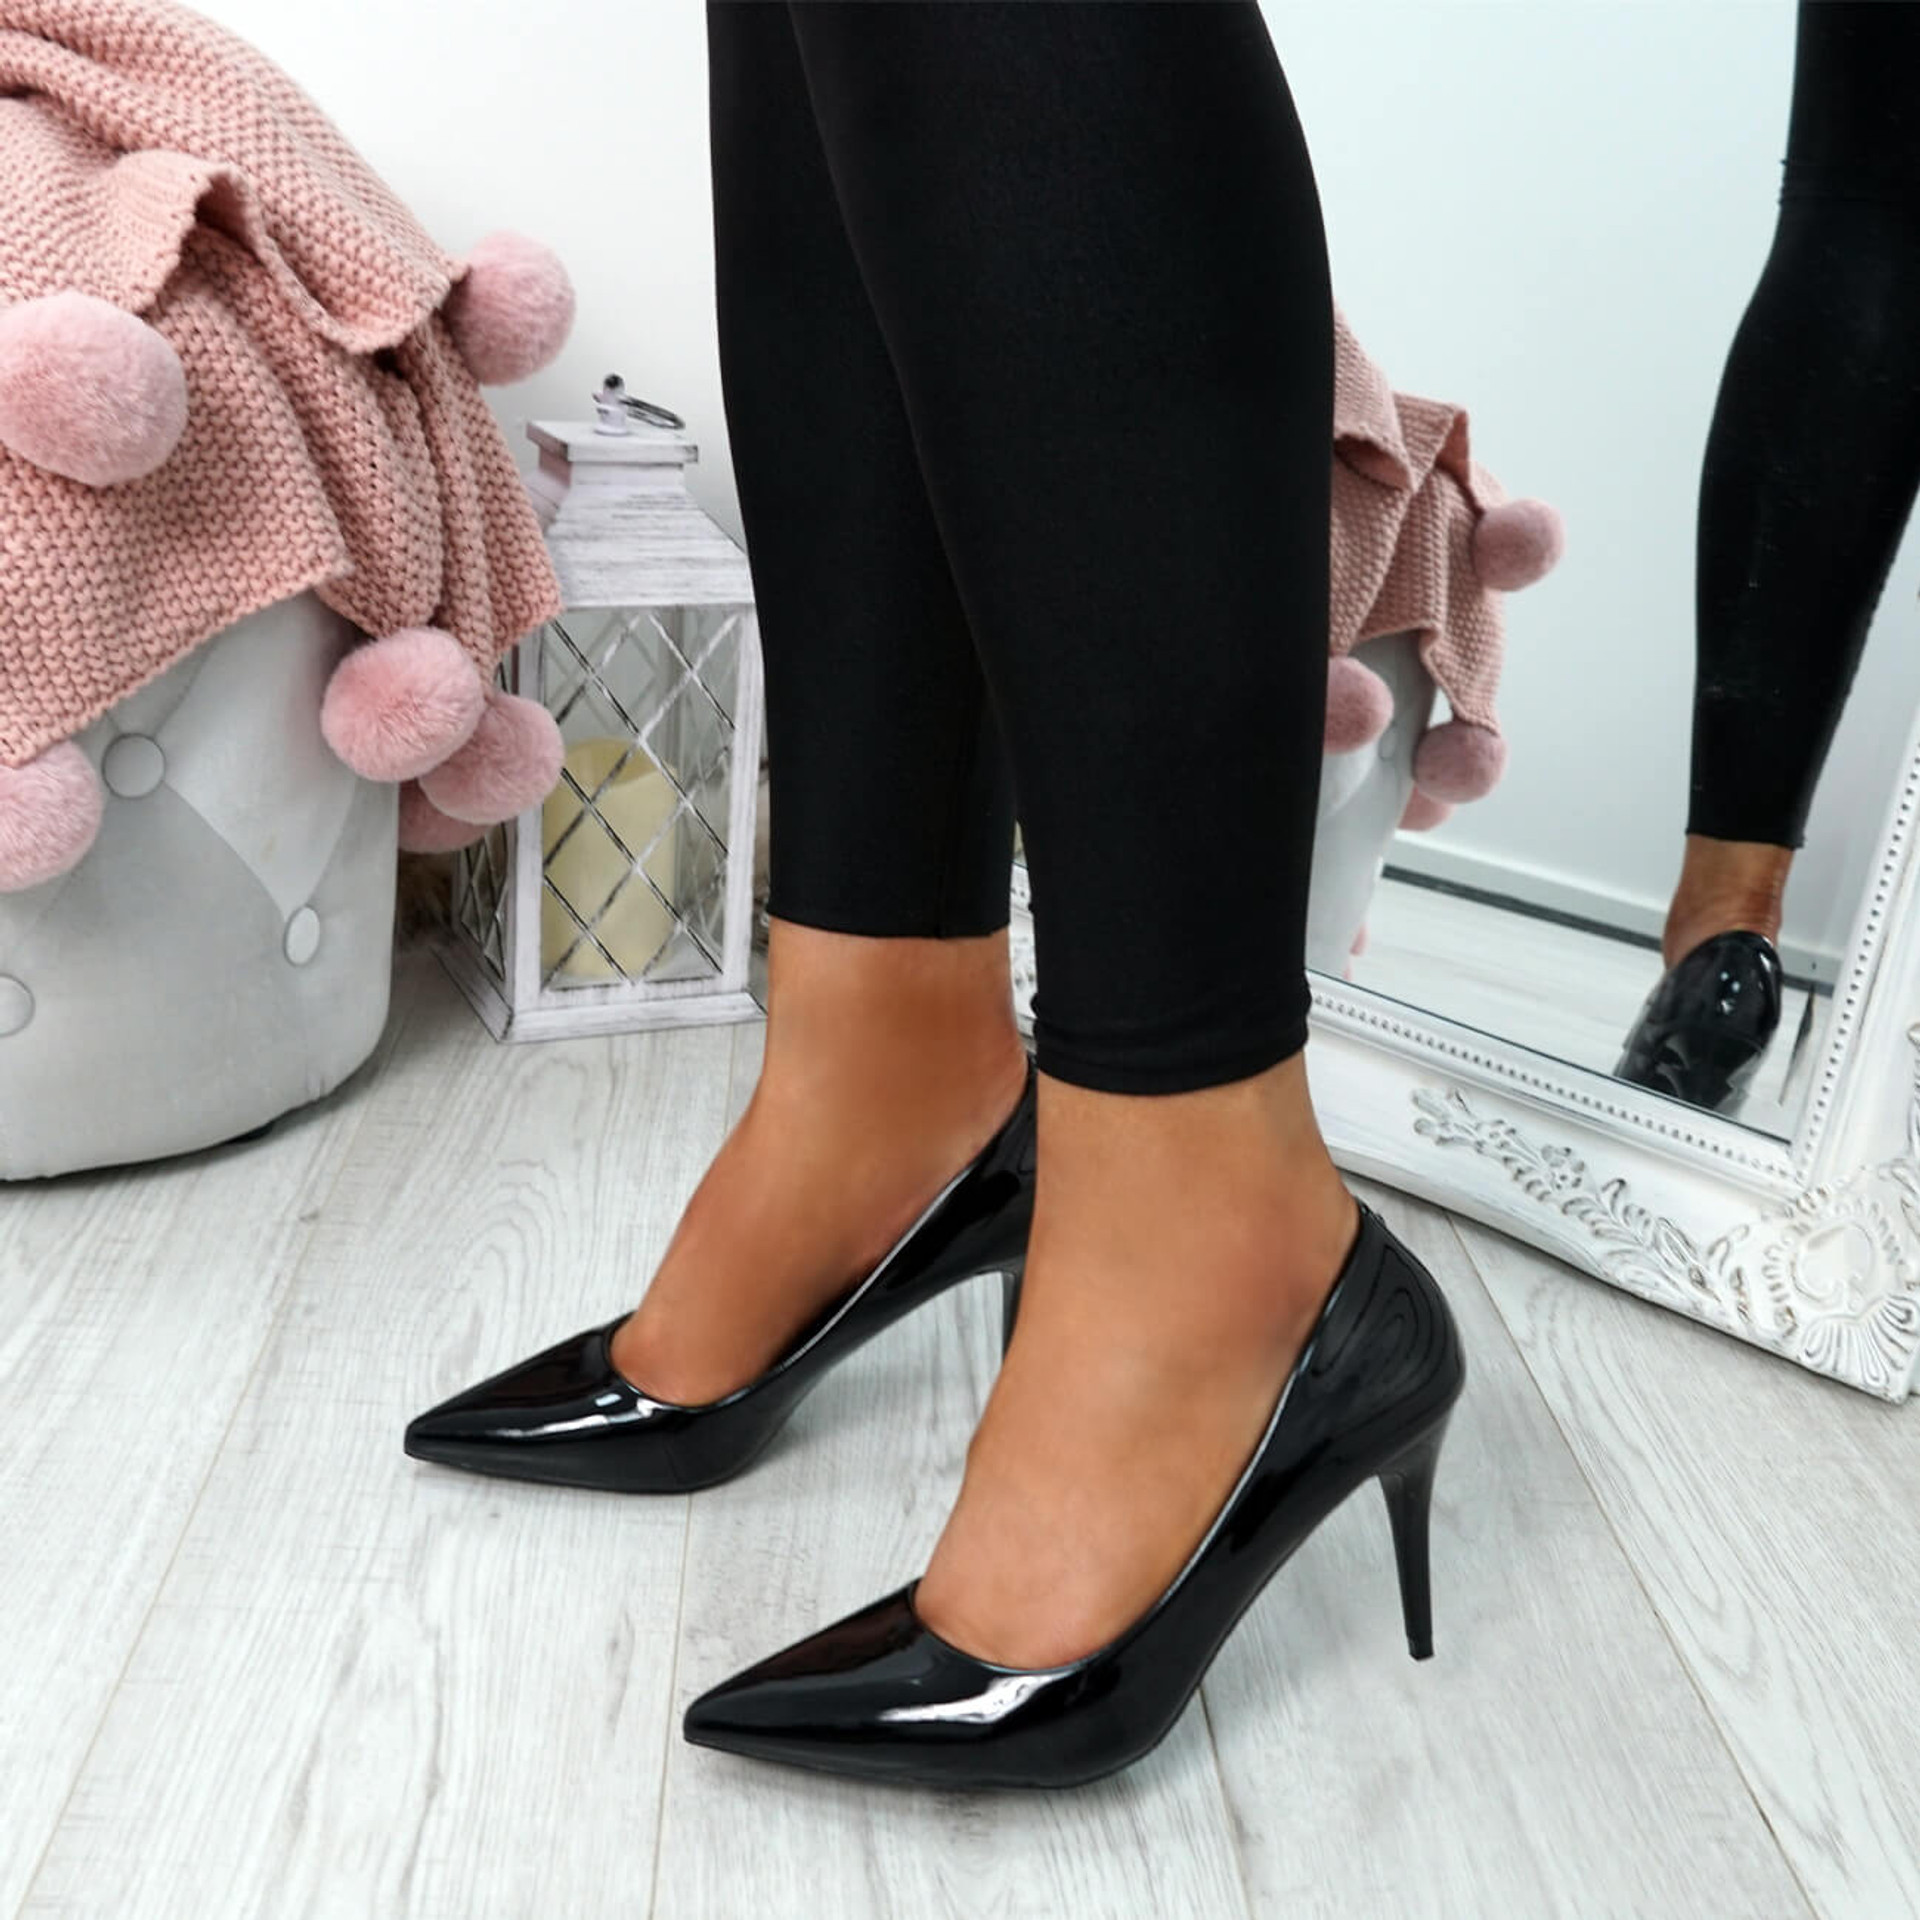 Black Heels for women in India | Business Insider India